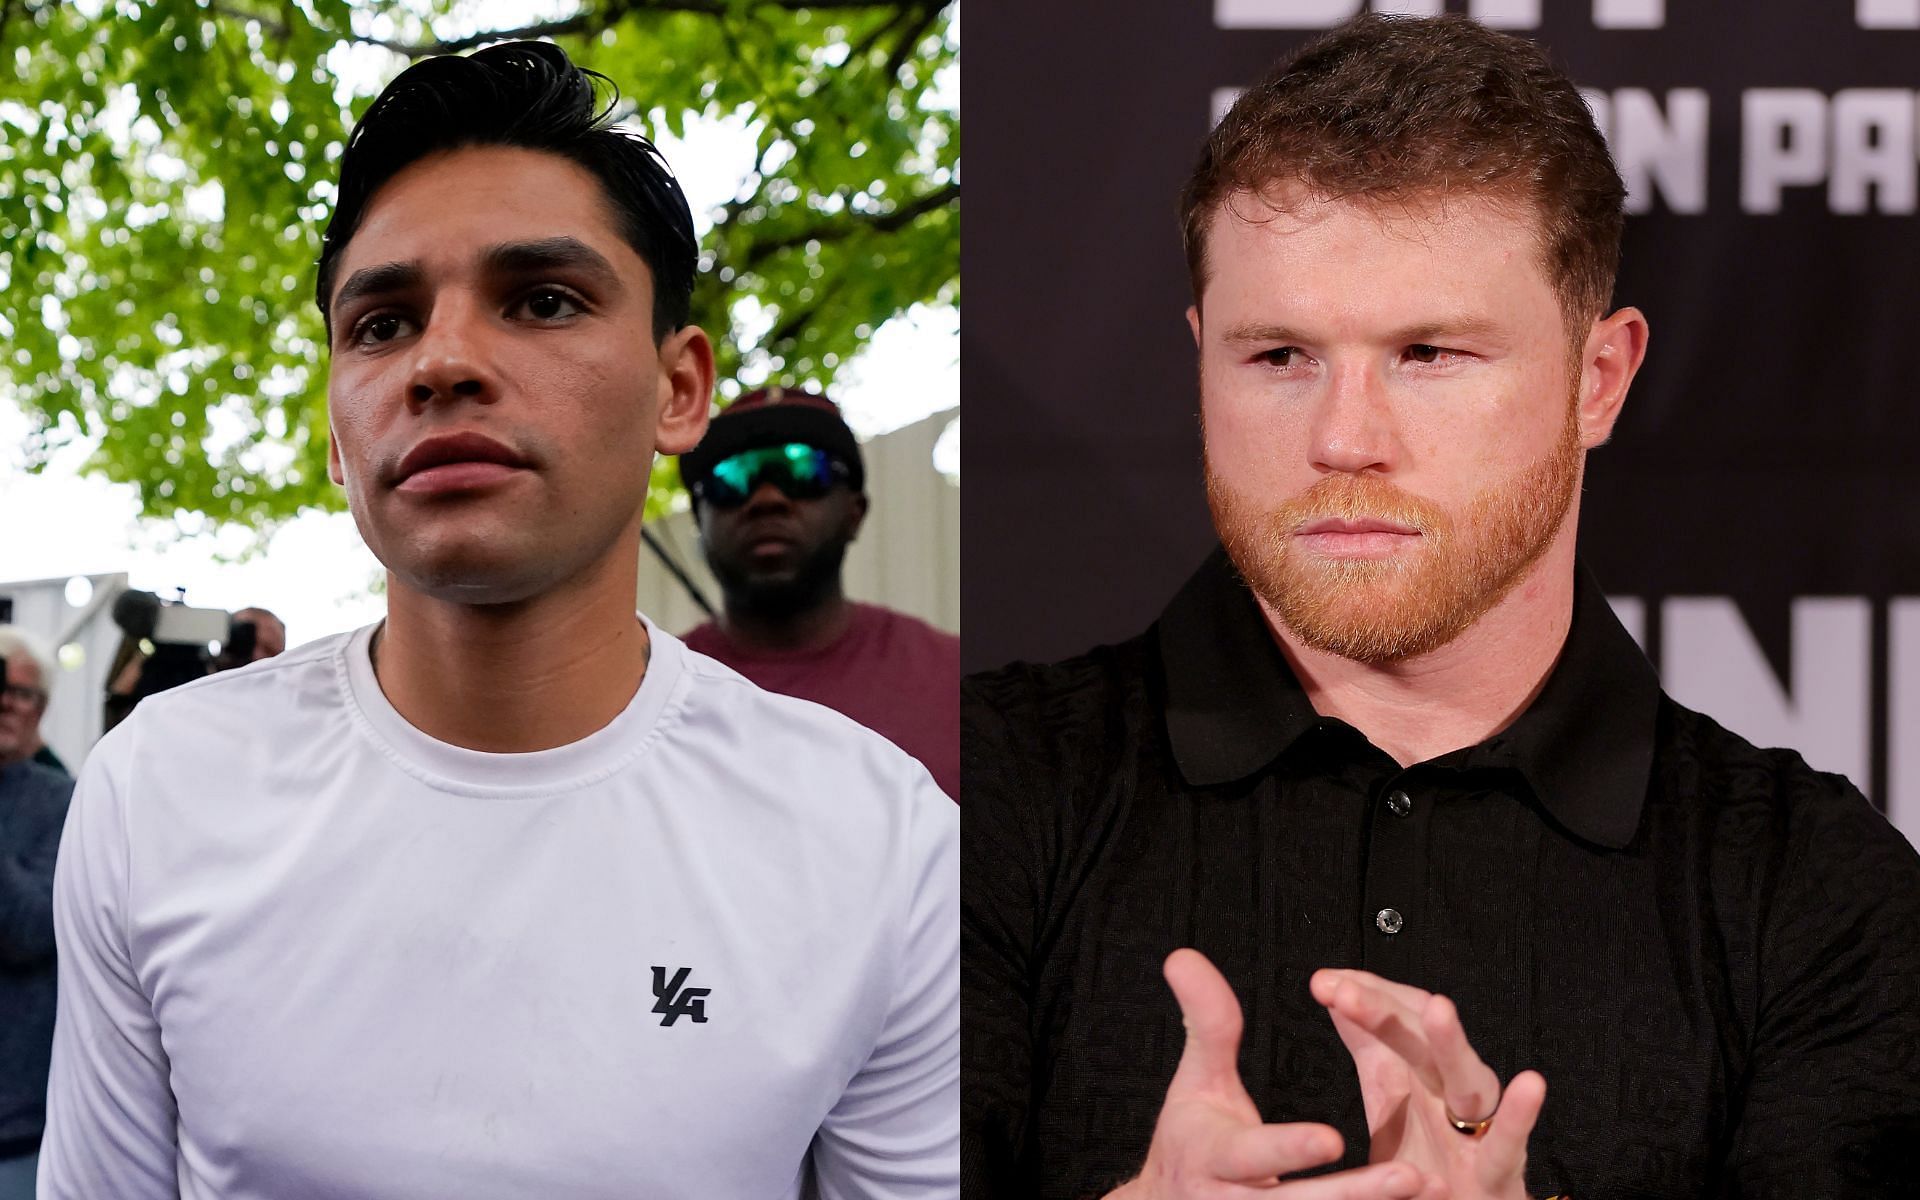 Ryan Garcia (left) and Canelo Alvarez (right) are heralded among the biggest box office draws in the current boxing landscape [Images courtesy: Getty Images]